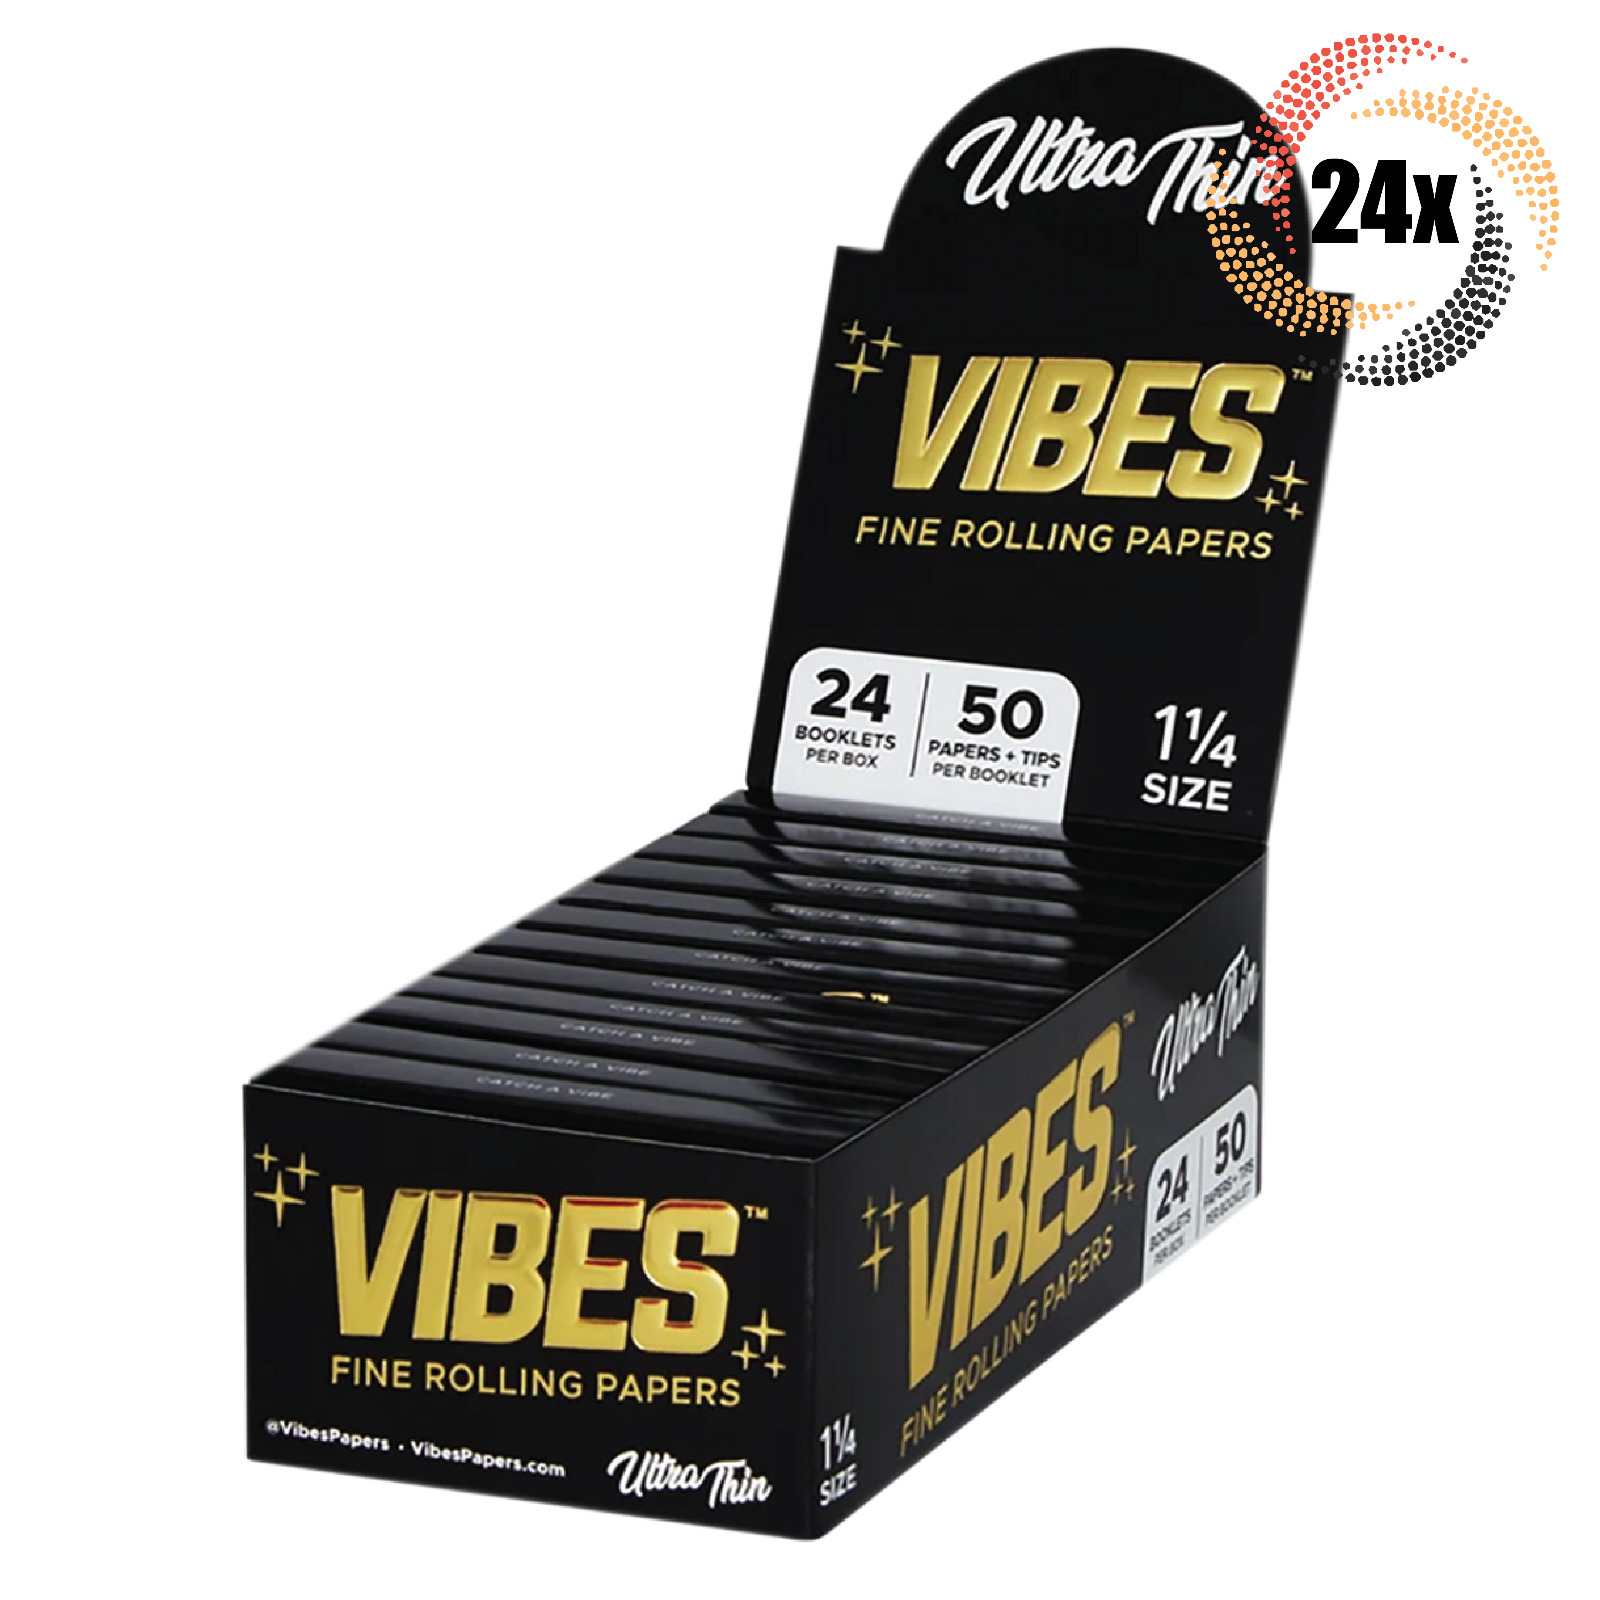 Full Box 24x Packs Vibes Black Fine Rolling Papers & Tips 1 1/4 | + 2 Free Tubes